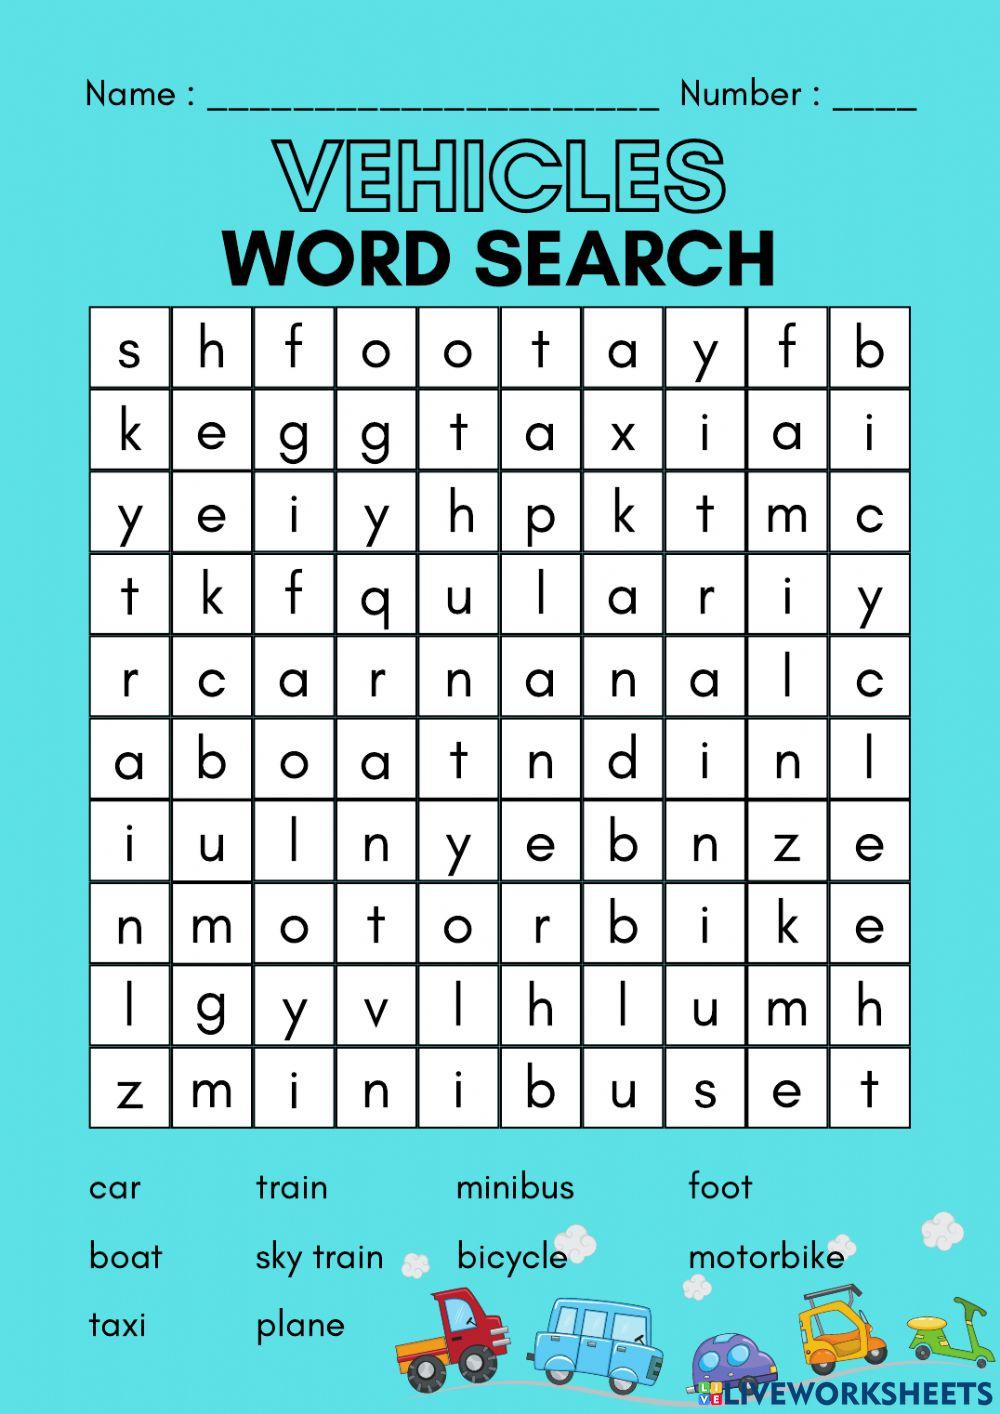 Vehicles word search 